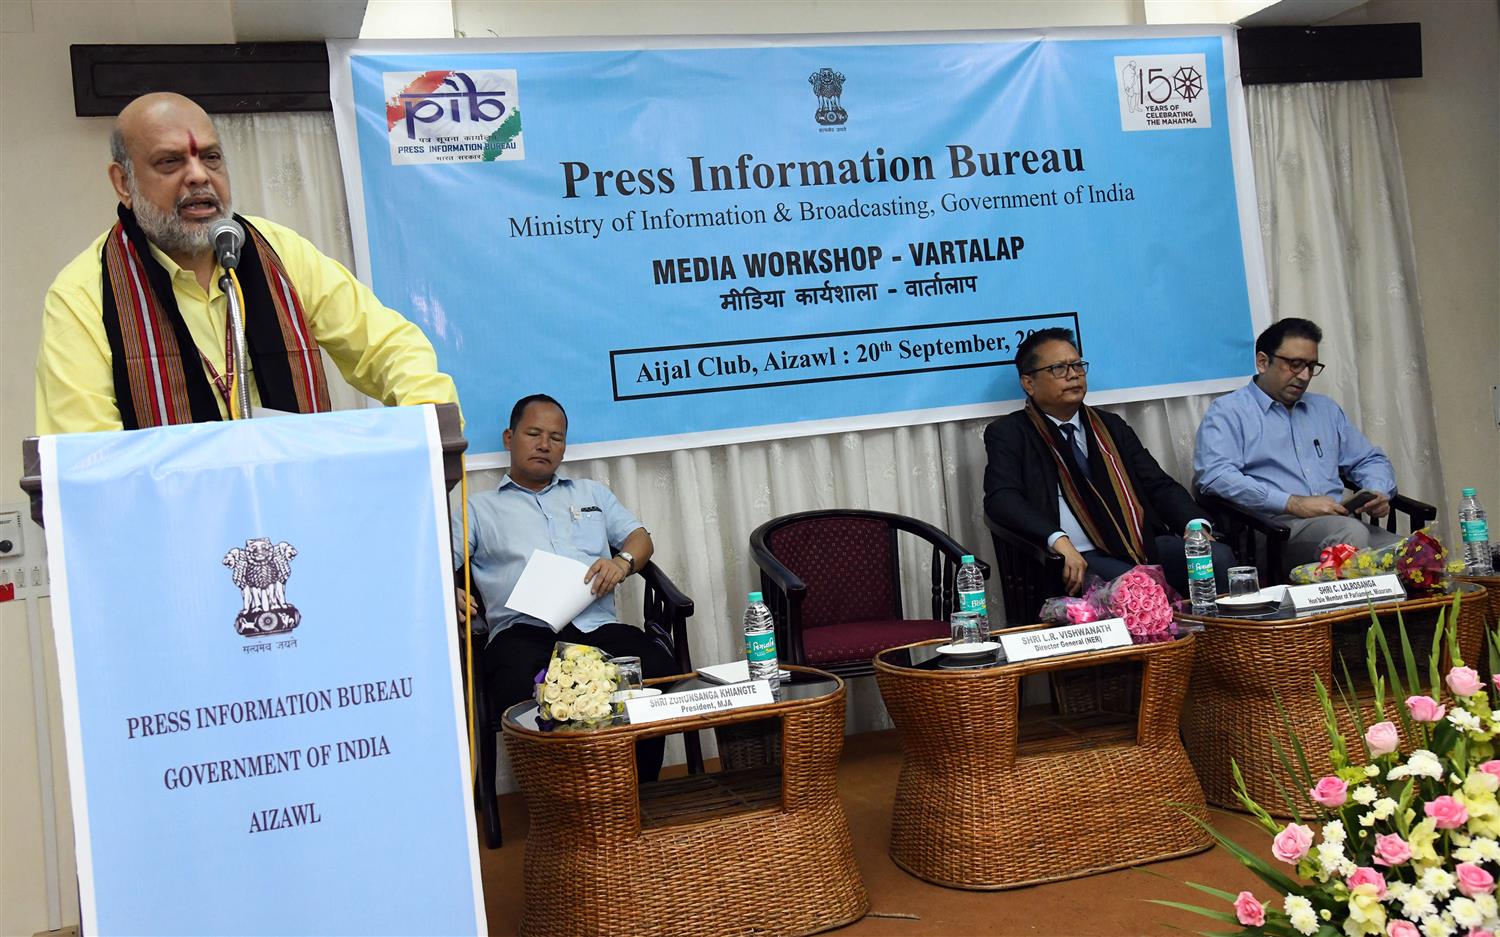 Shri L R Vishwanath Director General, Ministry of Information &  Broadcasting  delivering his speech at  Vartalap organized by Press Information Bureau, Aizawl on 20th September 2019. Shri C Lalrosanga, Member of Parliament, Mizoram, Shri Zonunsanga Khiangte, President of Mozoram Journalist’s Association and Shri Ashish Kundra, CEO, Election office of Mizoram are also seen in the picture